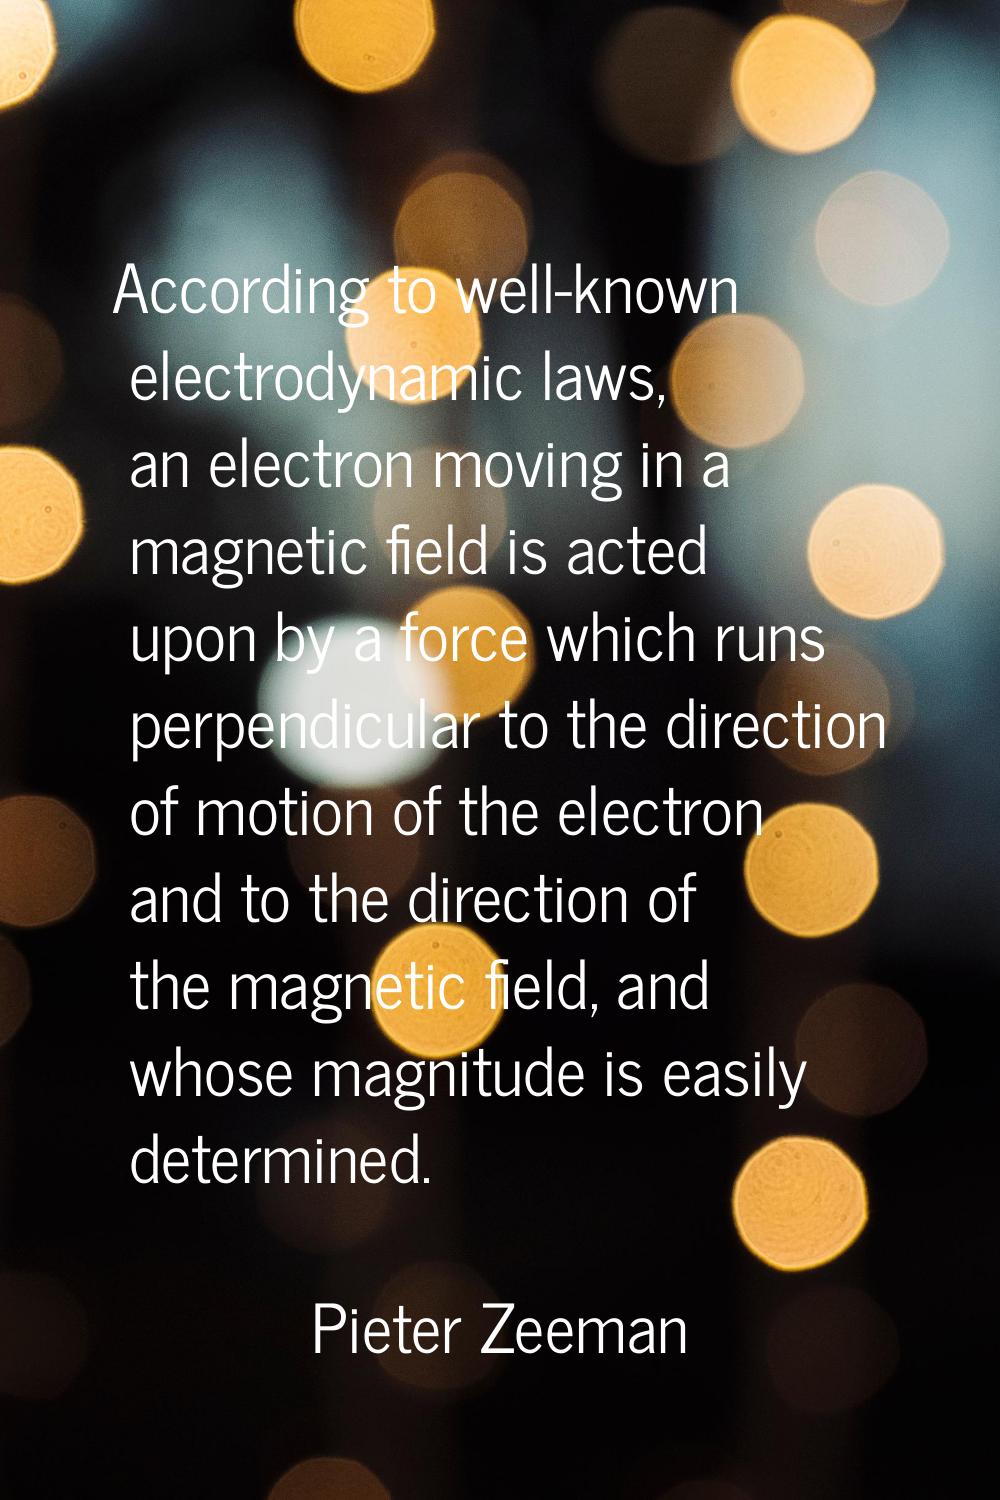 According to well-known electrodynamic laws, an electron moving in a magnetic field is acted upon b